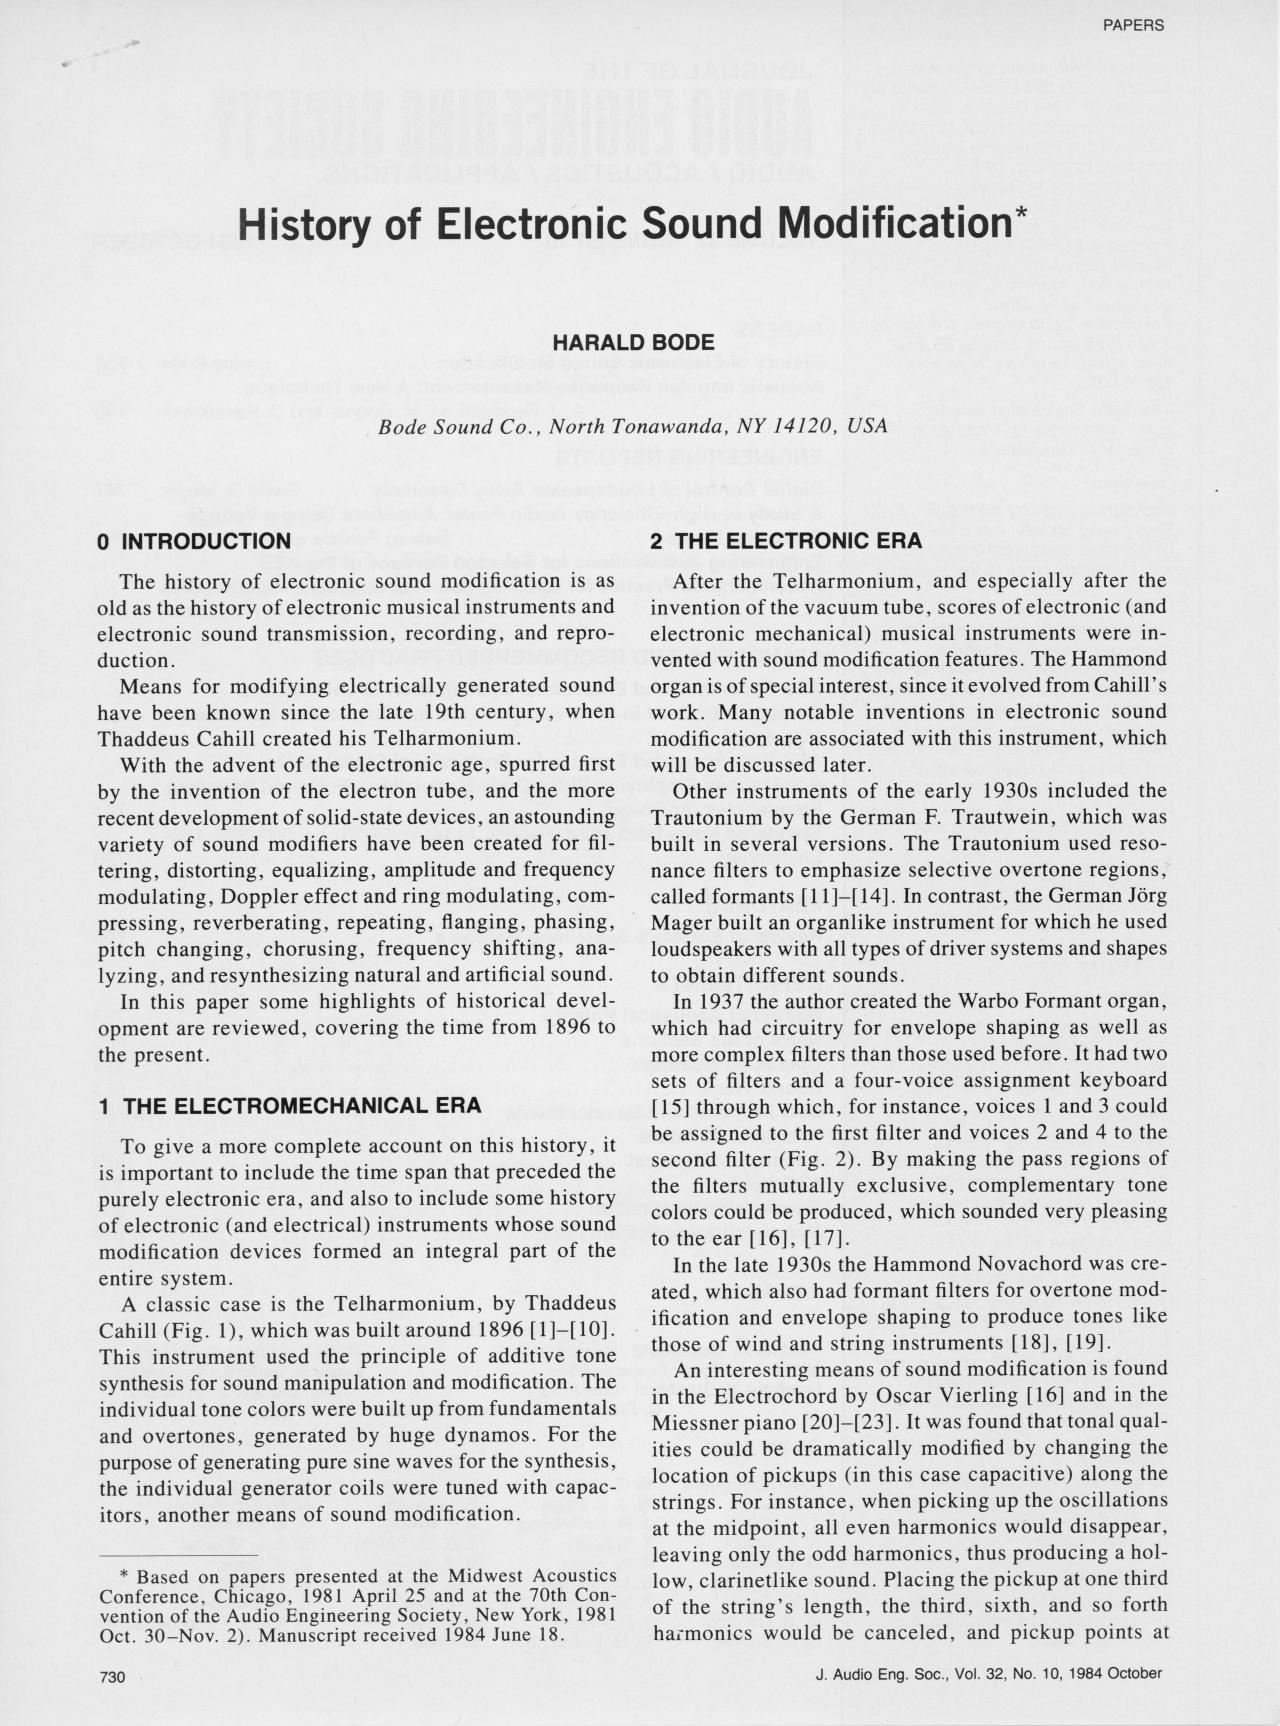 Harald Bode: »History of Electronic Sound Modification« (1984)